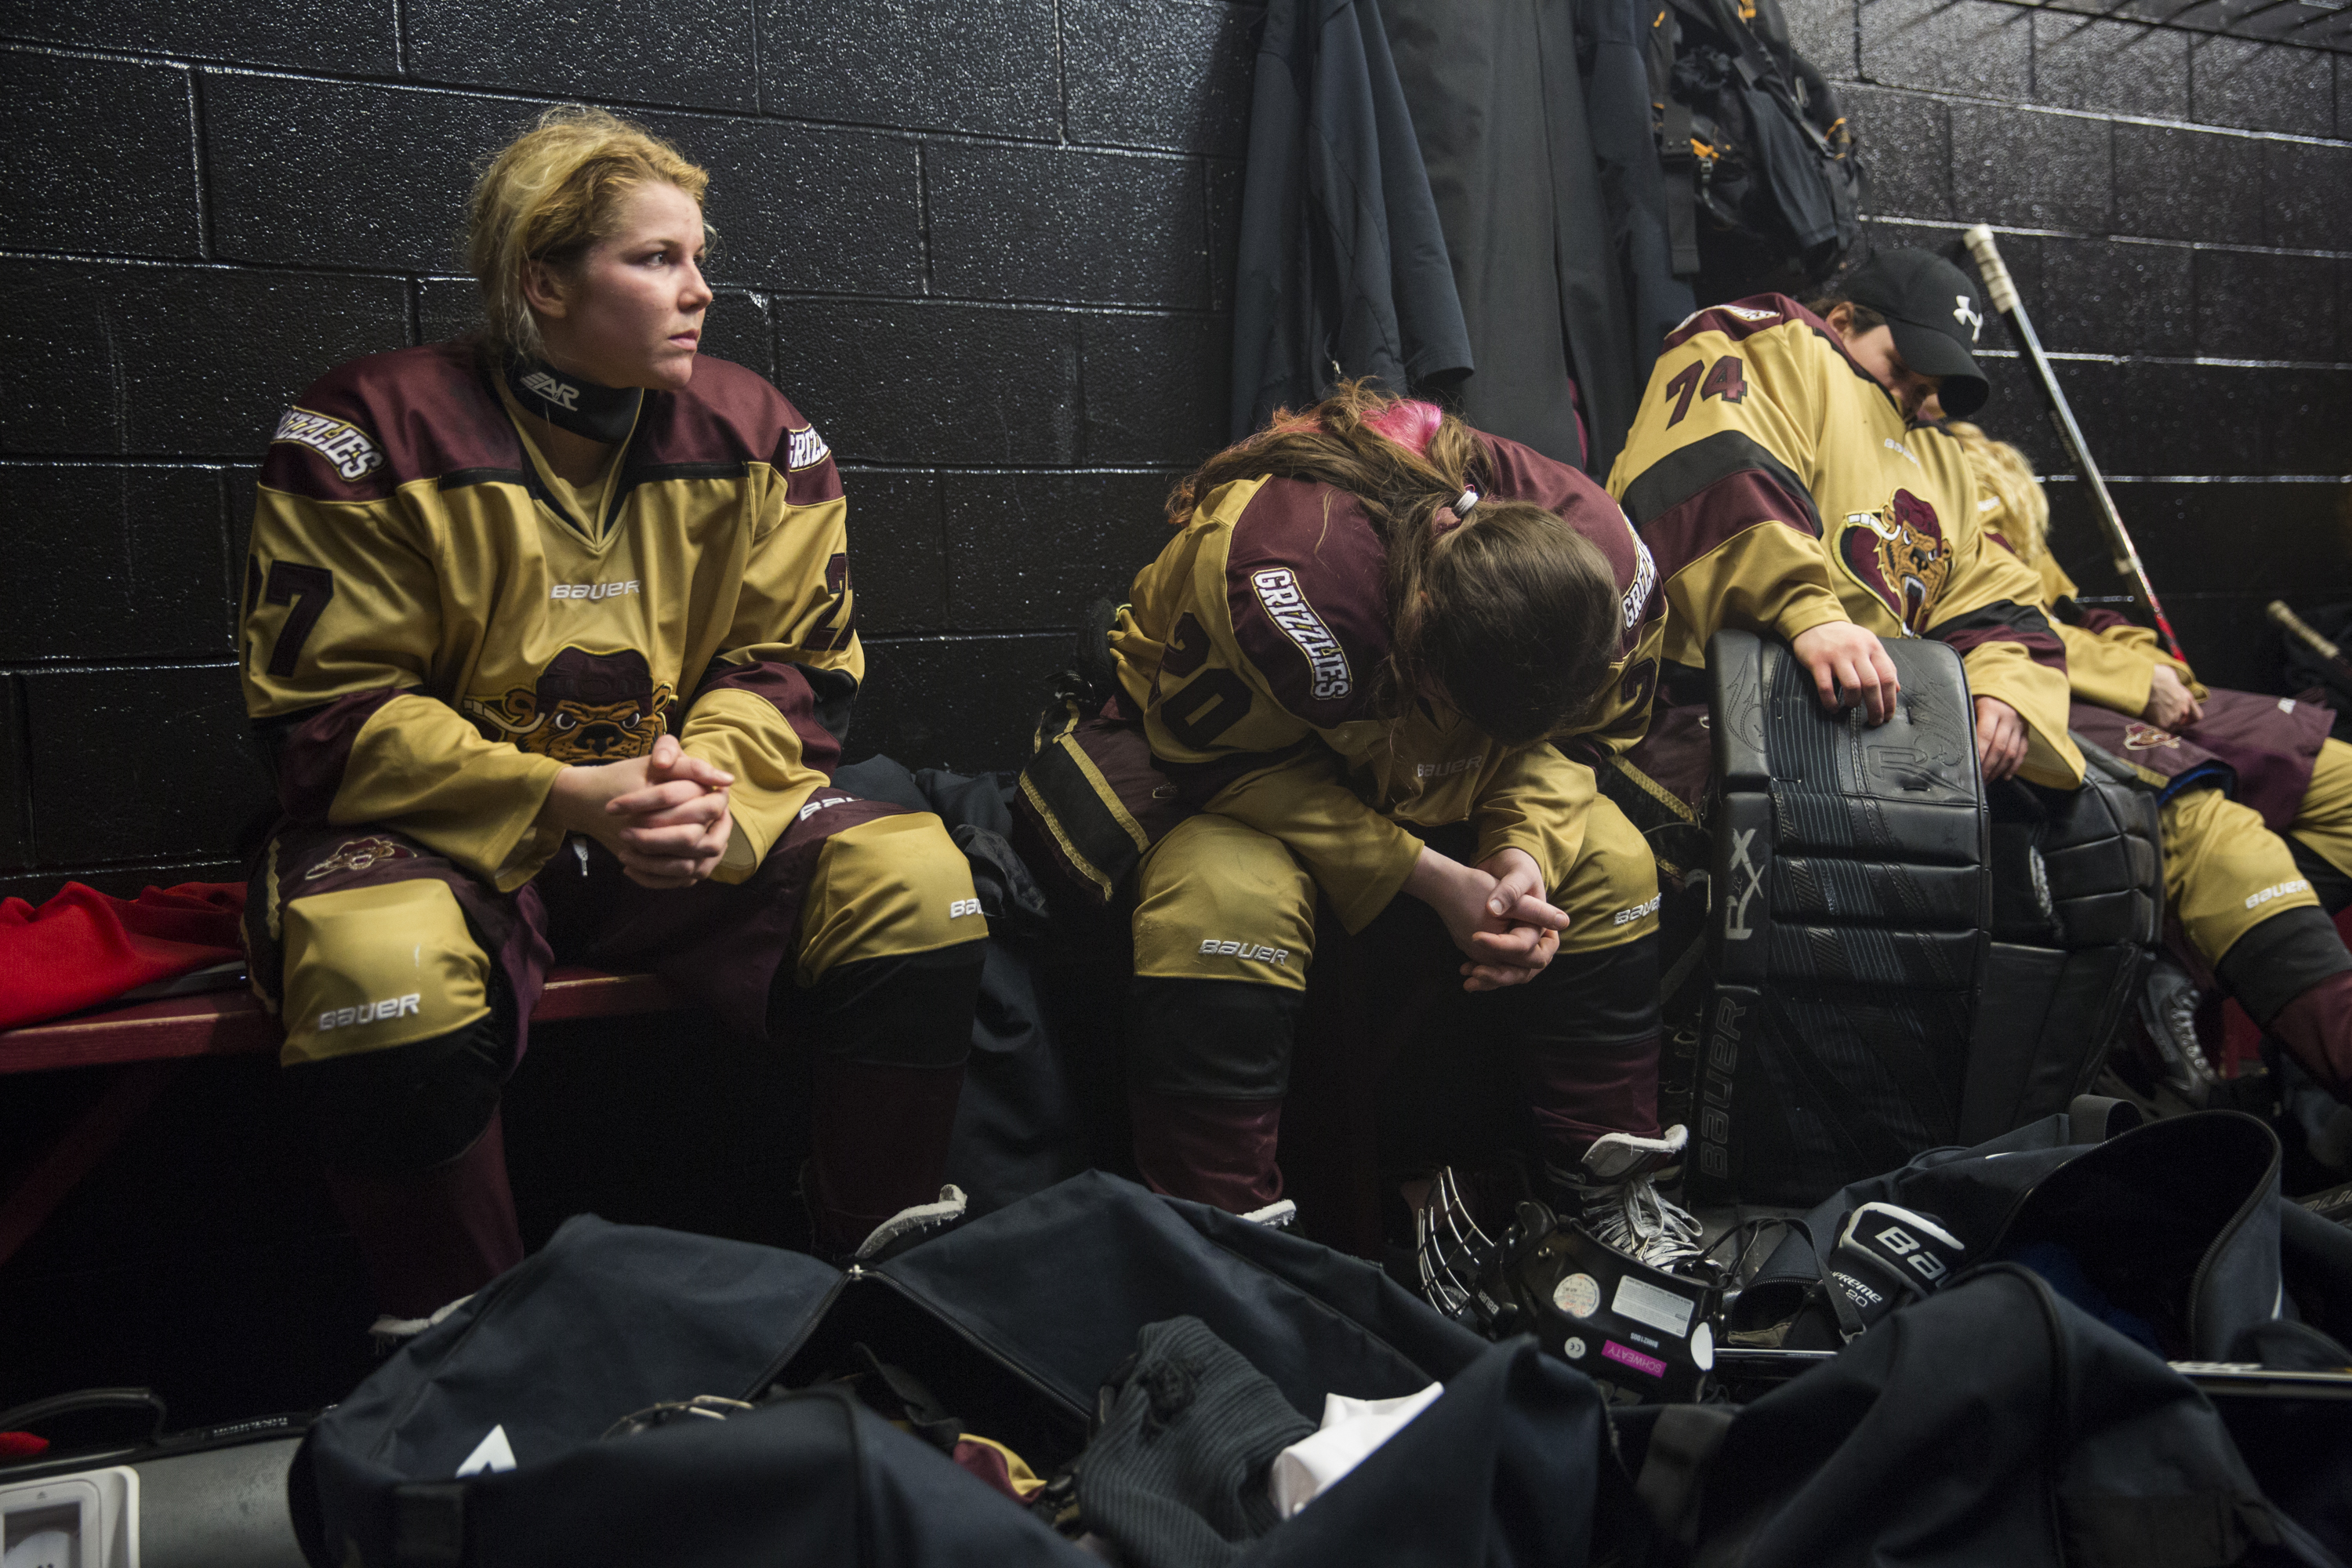 (From left) Shanley and her teammates, Lexi Firkins and Serena Angelo rest during half time after the second period of their first game against Troy-Albany on March 6, 2015. The Rochester Grizzlies were losing 0-1 at the end of the second period and came back to win the game 2-1 in a shootout.